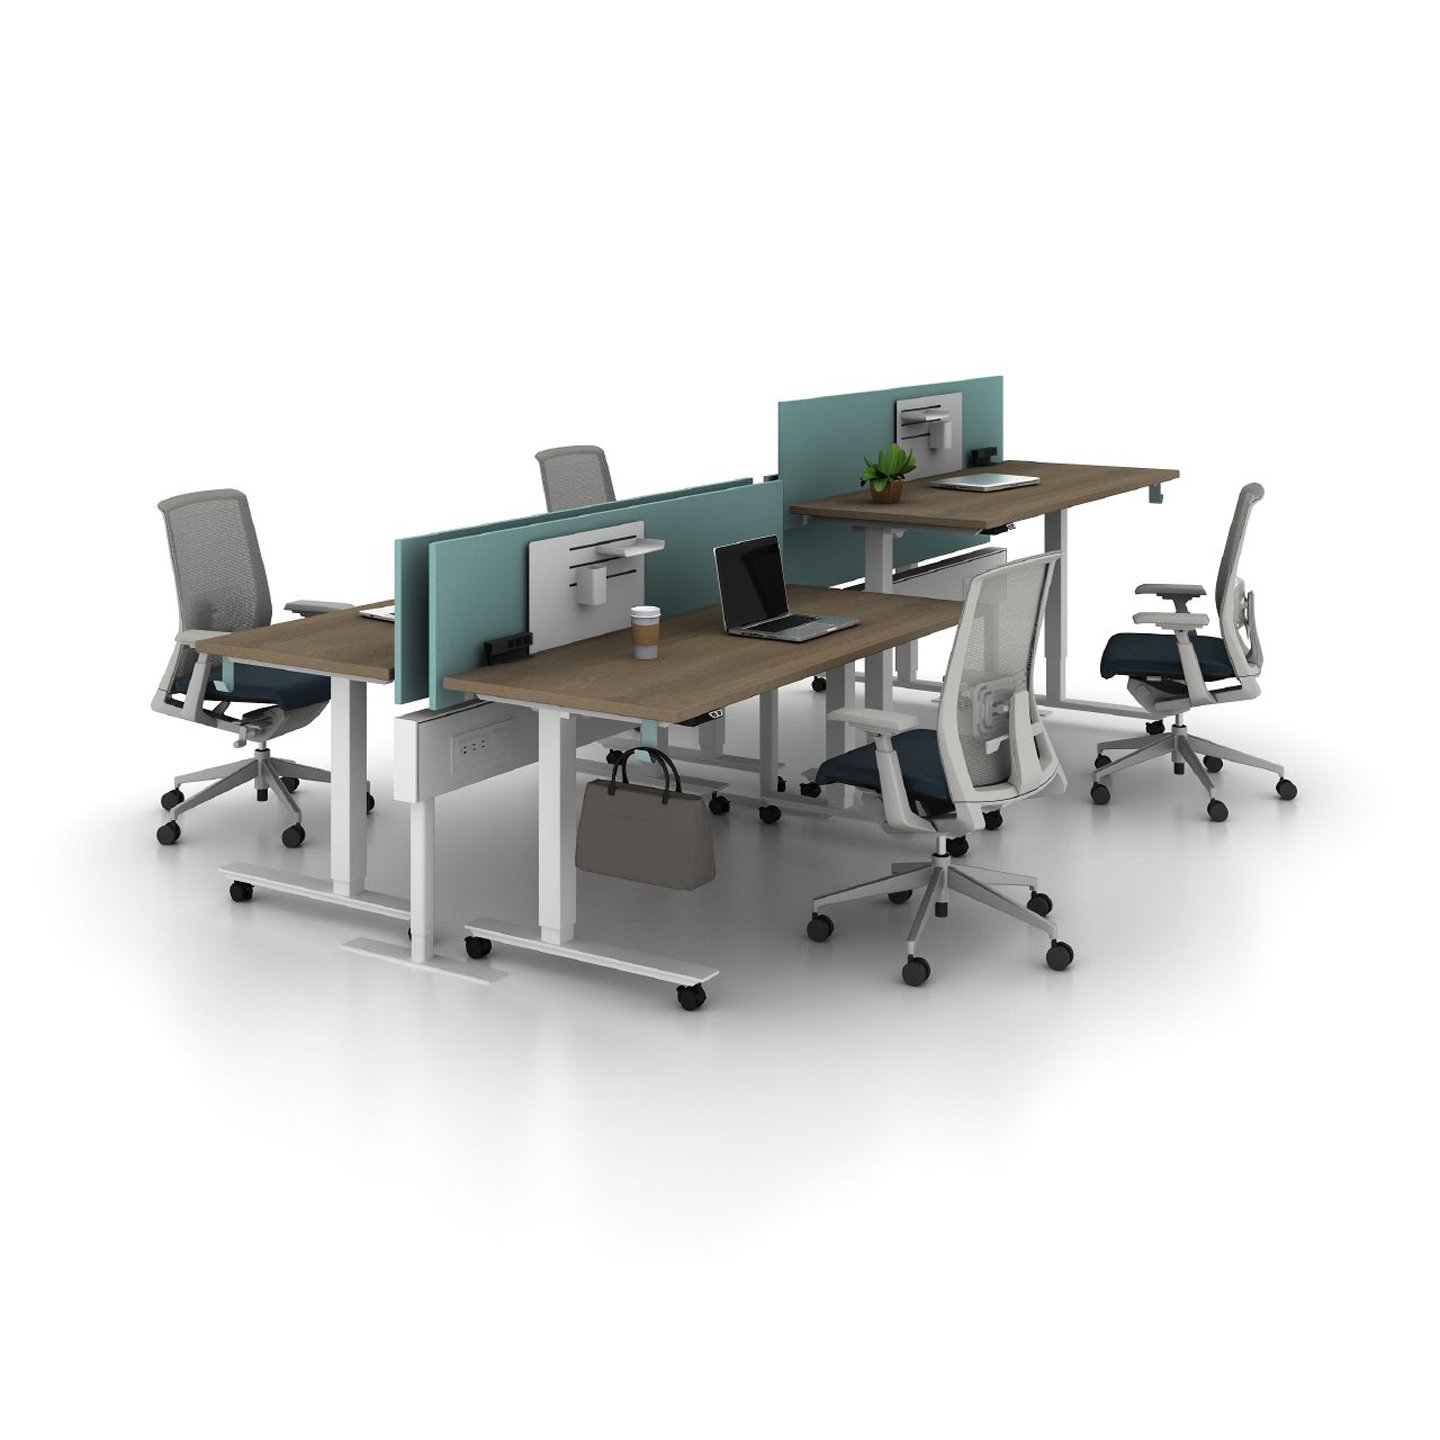 Haworth Compose Beam Workspace divider in mock office space with height adjustable desks